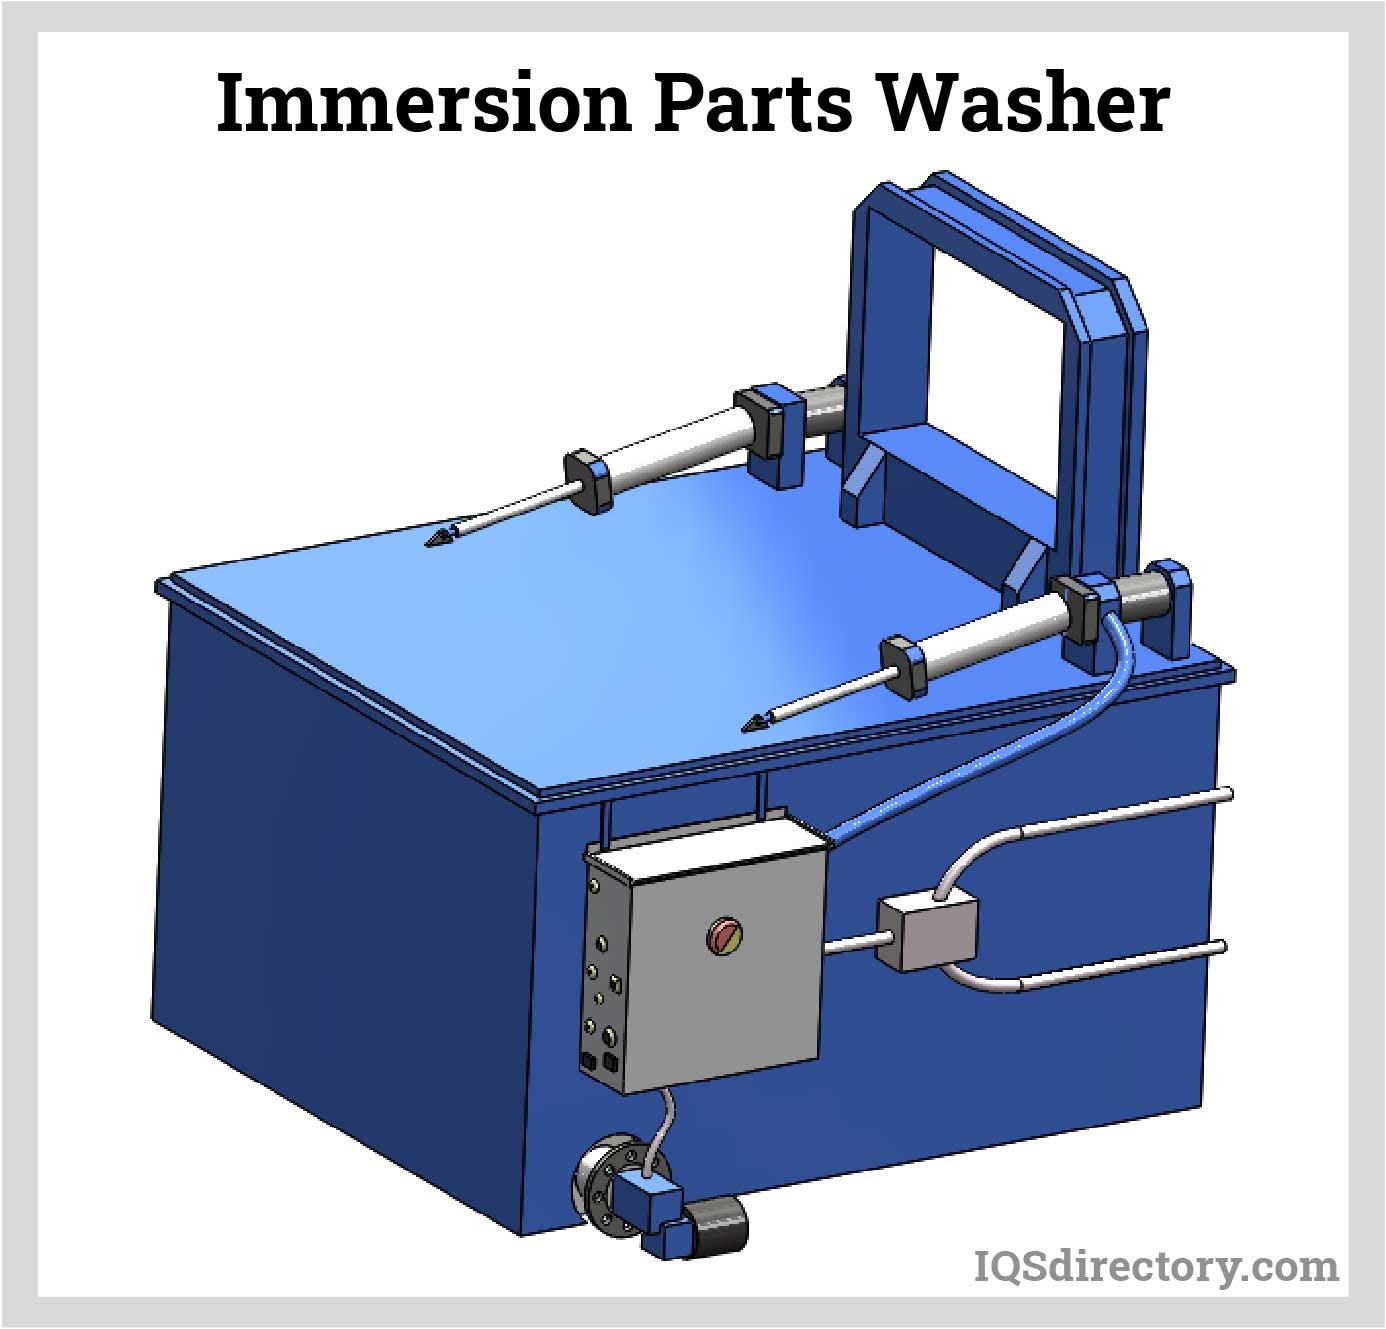 Immersion Parts Washer